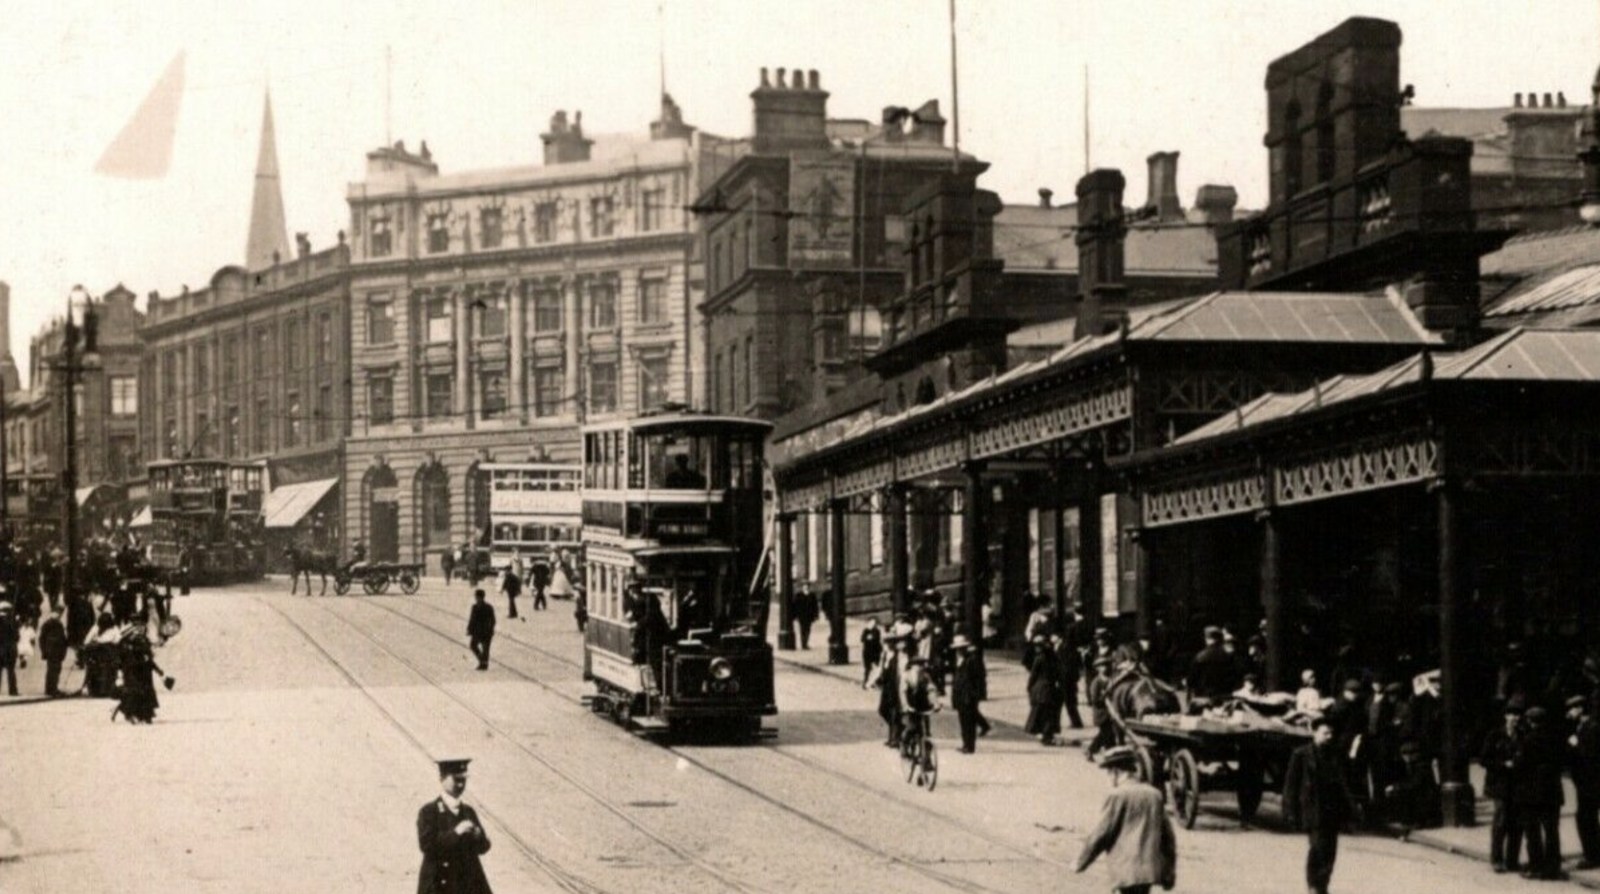 Trams and Horses on High Street